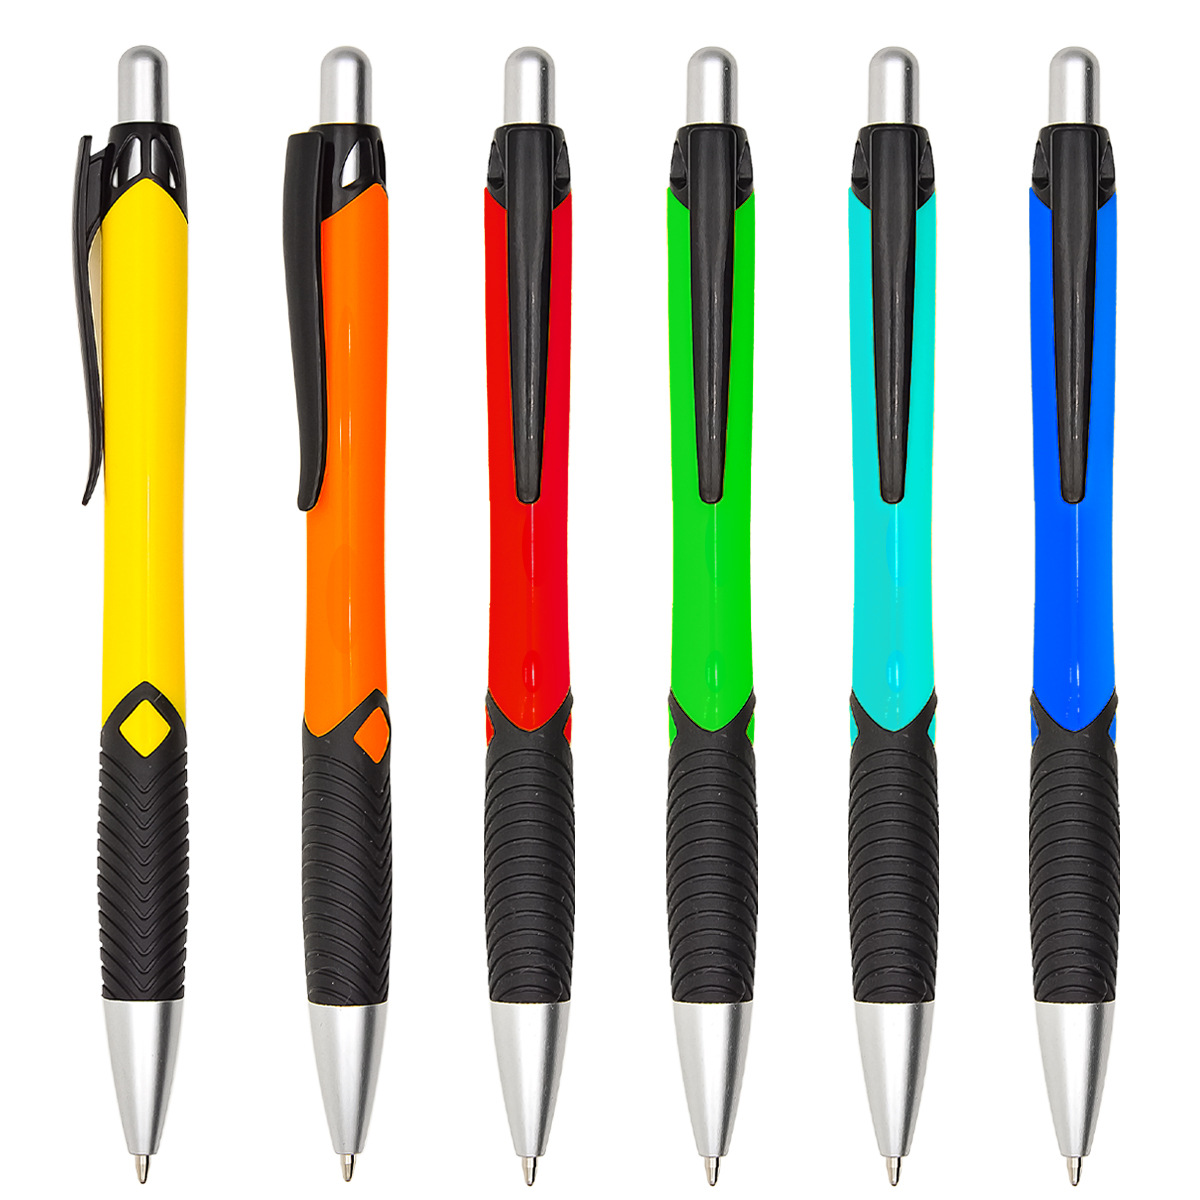 Plastic press ballpoint pen Black soft rubber non-slip sheath can be equipped with ballpoint pen refill or neutral core